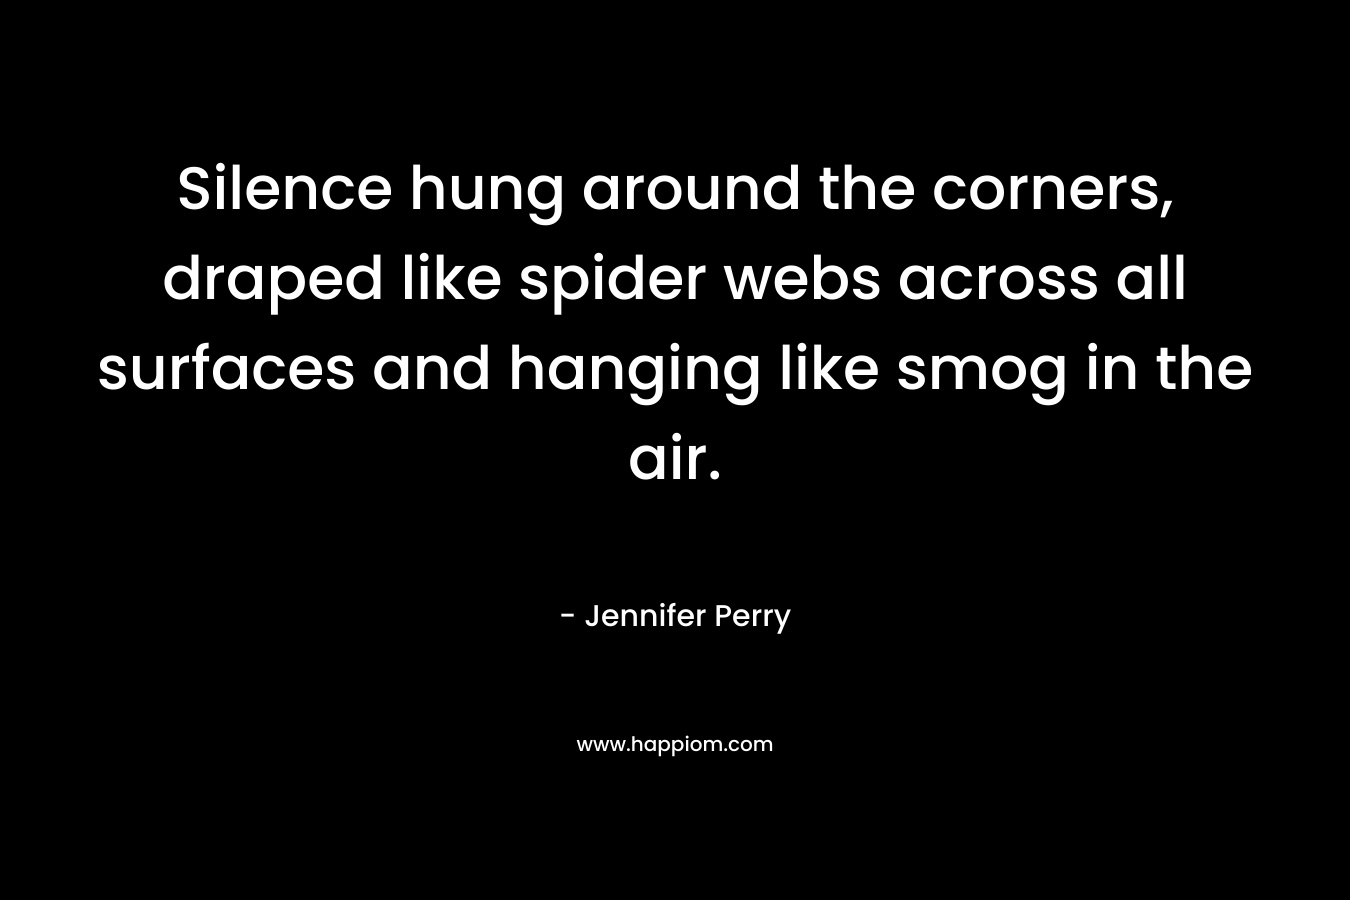 Silence hung around the corners, draped like spider webs across all surfaces and hanging like smog in the air. – Jennifer  Perry